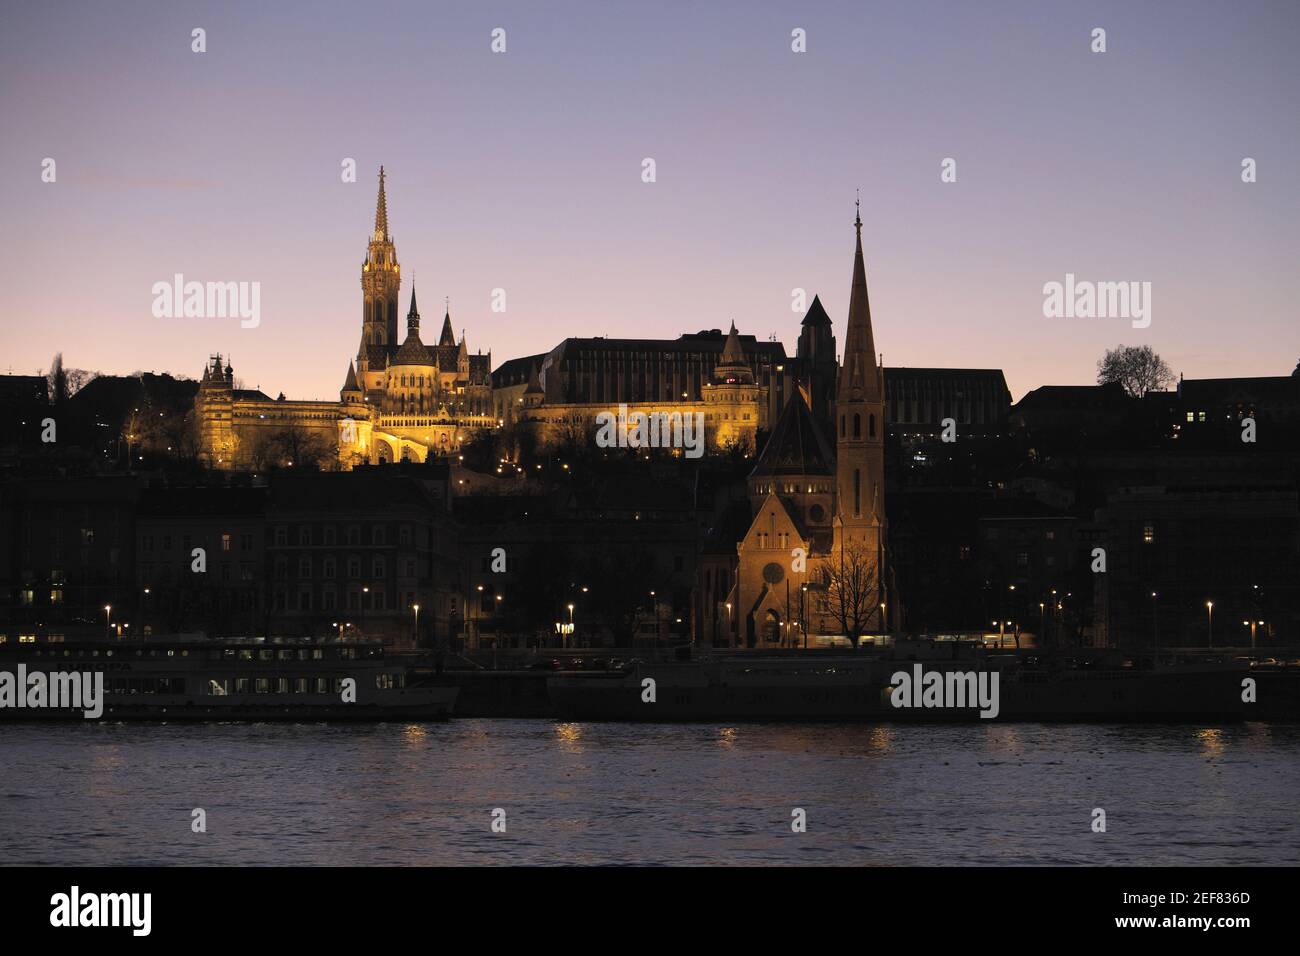 St Matthias Church and Fisherman's Bastion, with (I think) Szilagyi Dezso Church below, seen over River Duna (Danube) at night, Budapest, Hungary. Stock Photo